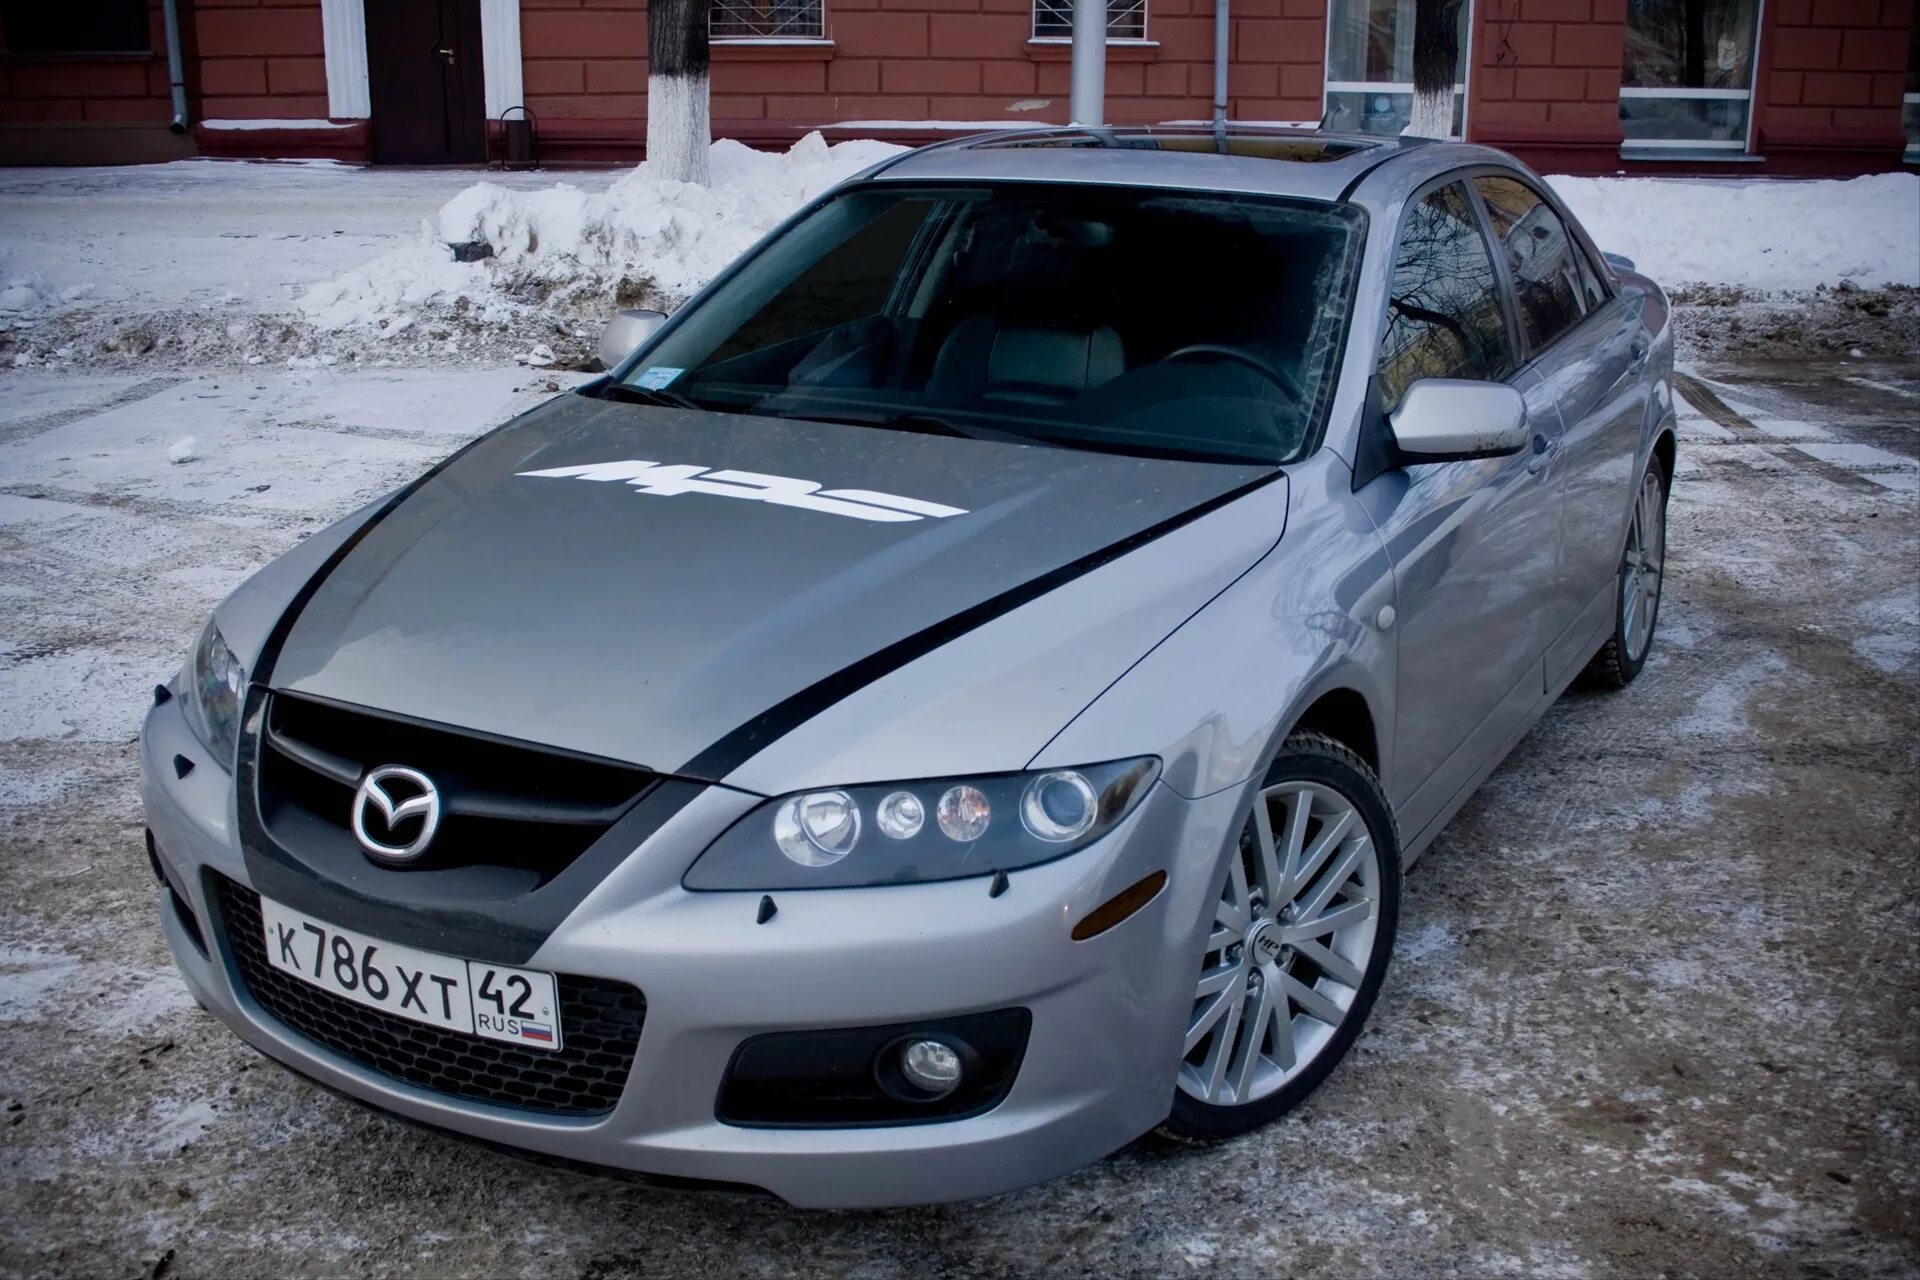 Мазда 6 2003 gg. Mazda 6 MPS 2006. Мазда 6 MPS Tuning. Мазда 6 gg 2006. Mazda 6 gg MPS.